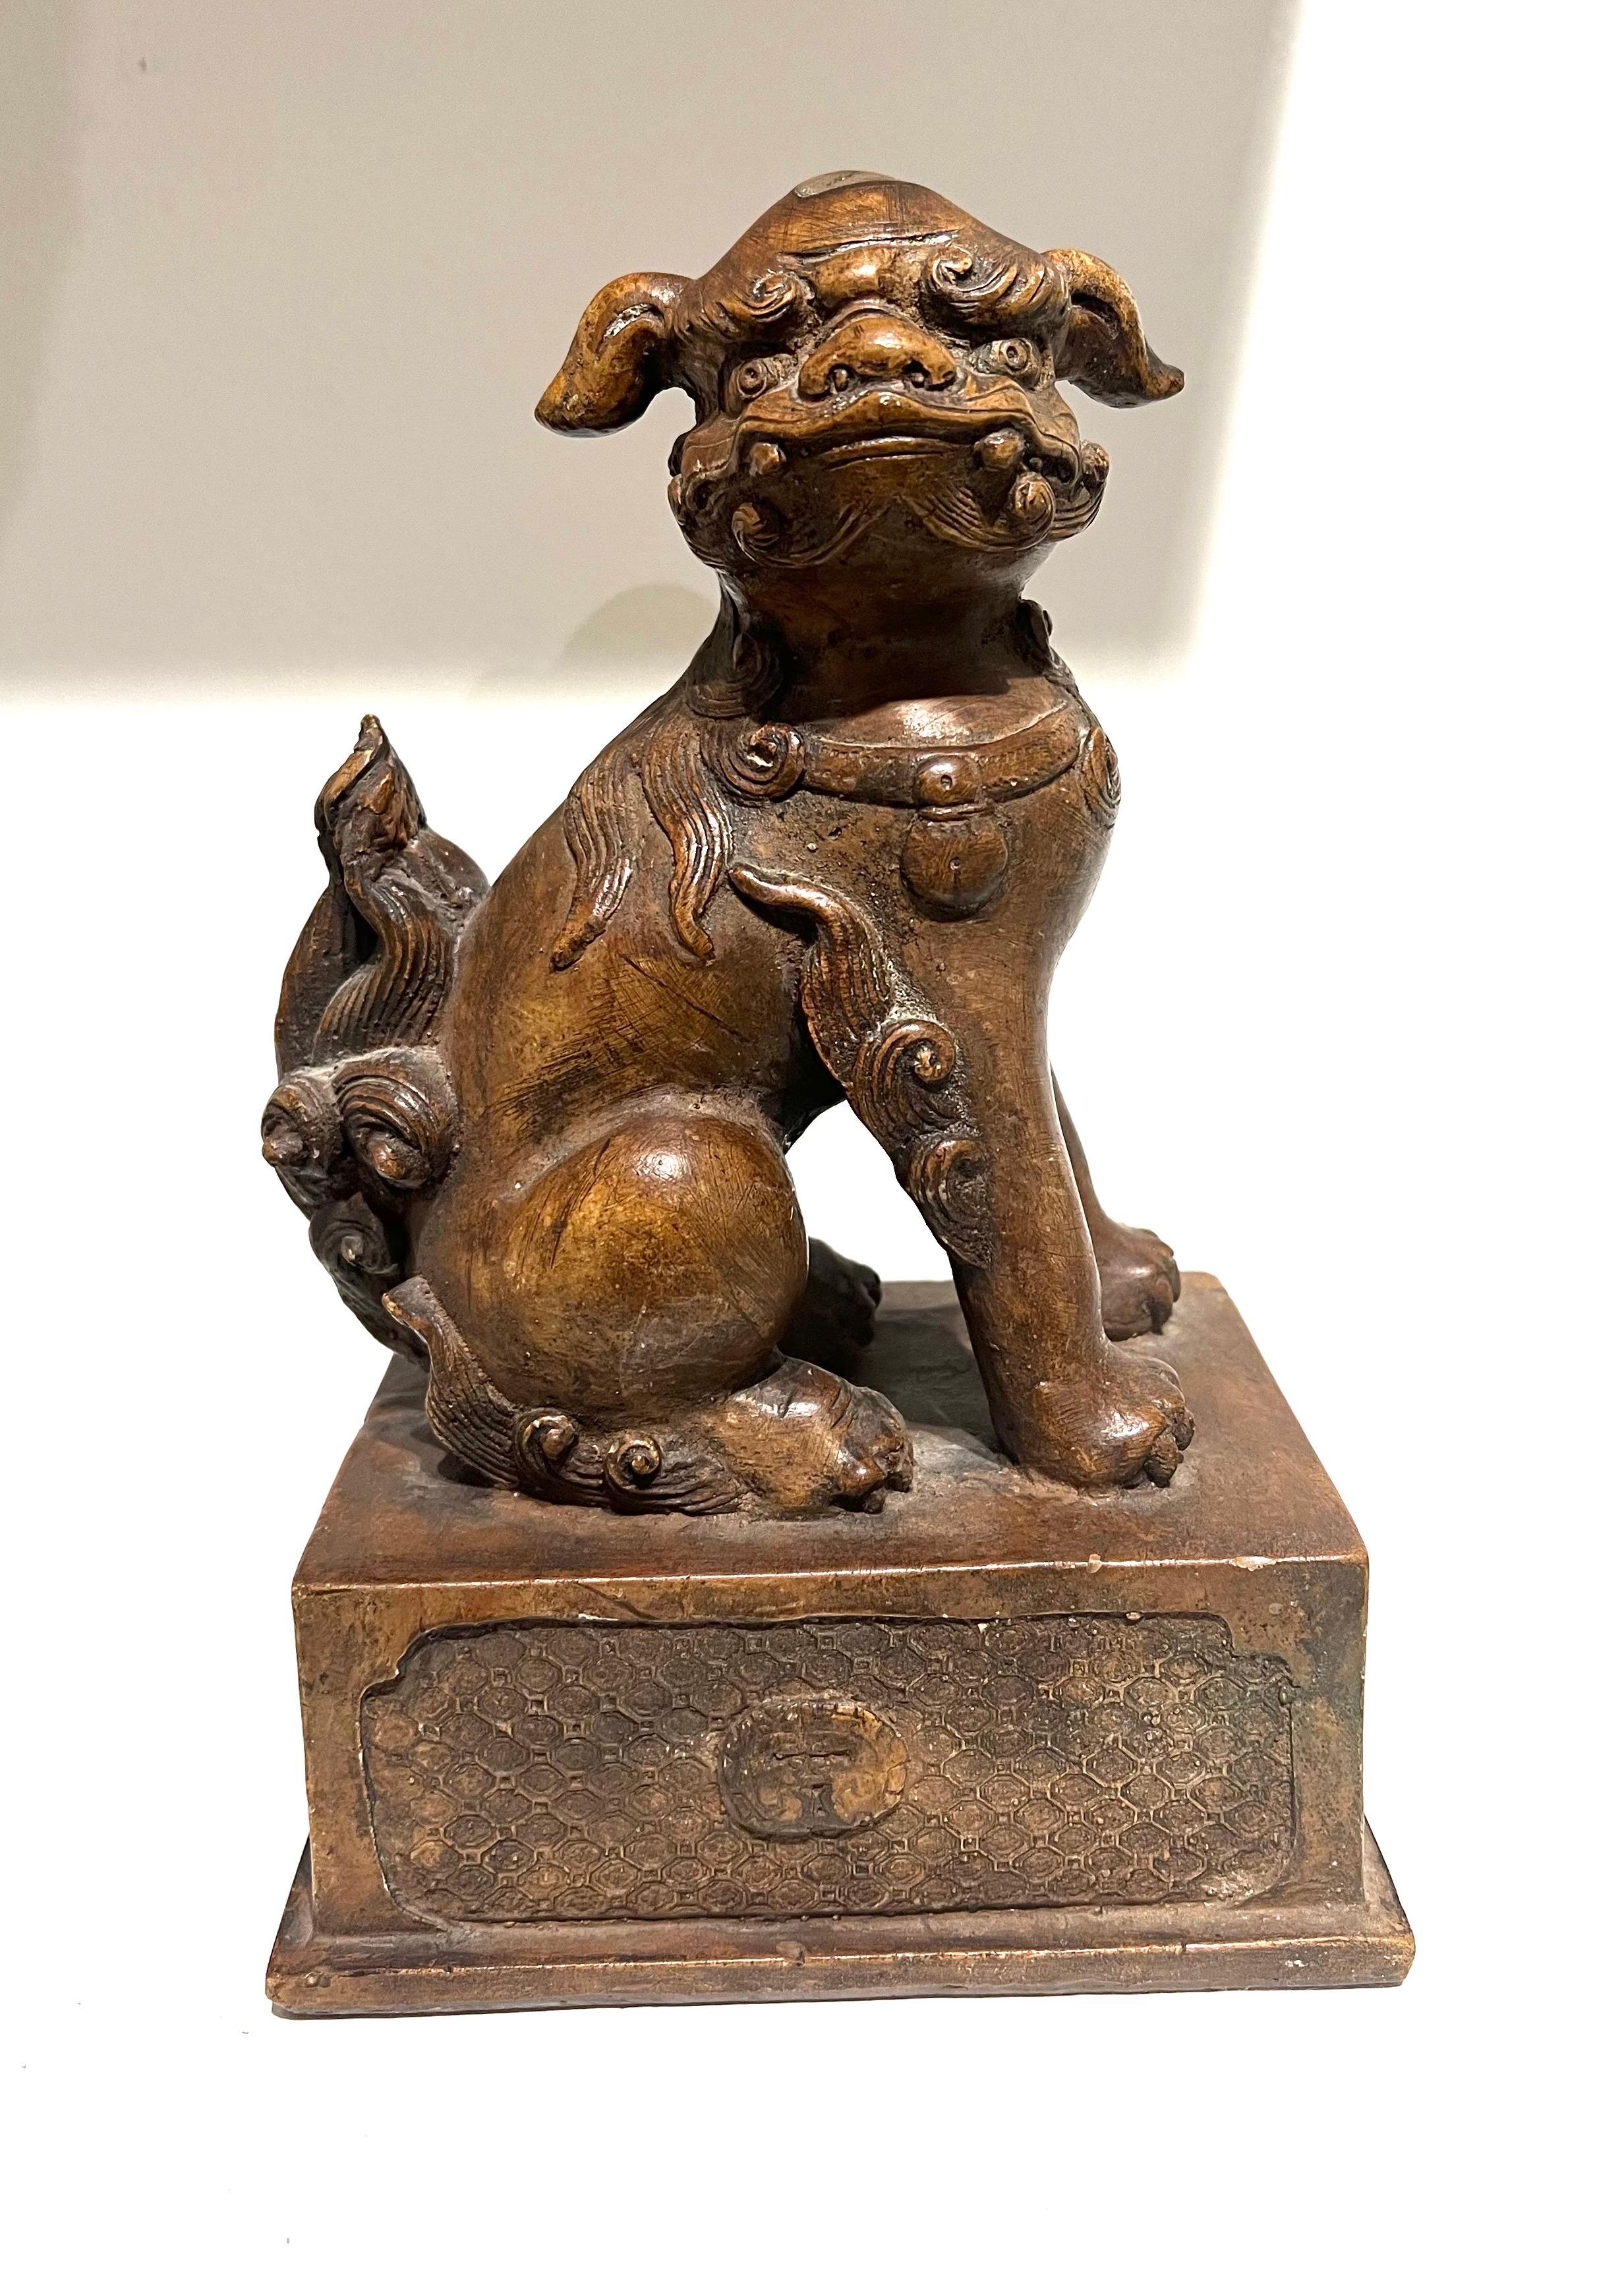 Nice vintage plaster foo dog sculpture in faux bronze finish, circa 1970s.